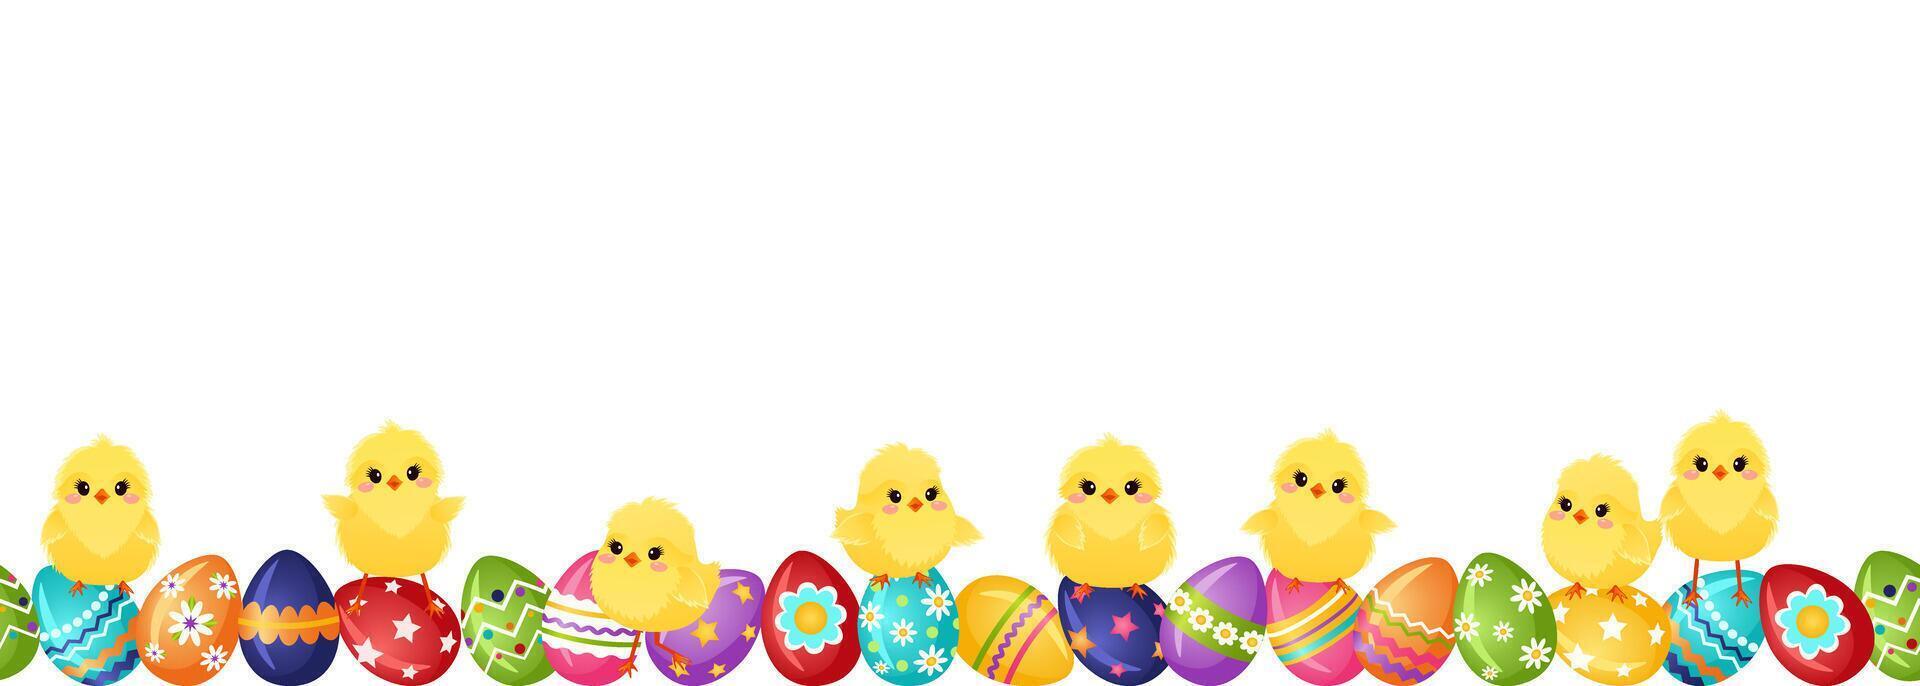 Seamless border with Easter eggs and yellow funny fluffy chickens. Easter decor template. Horizontal decorative divider with painted eggs and chickens. Vector illustration.